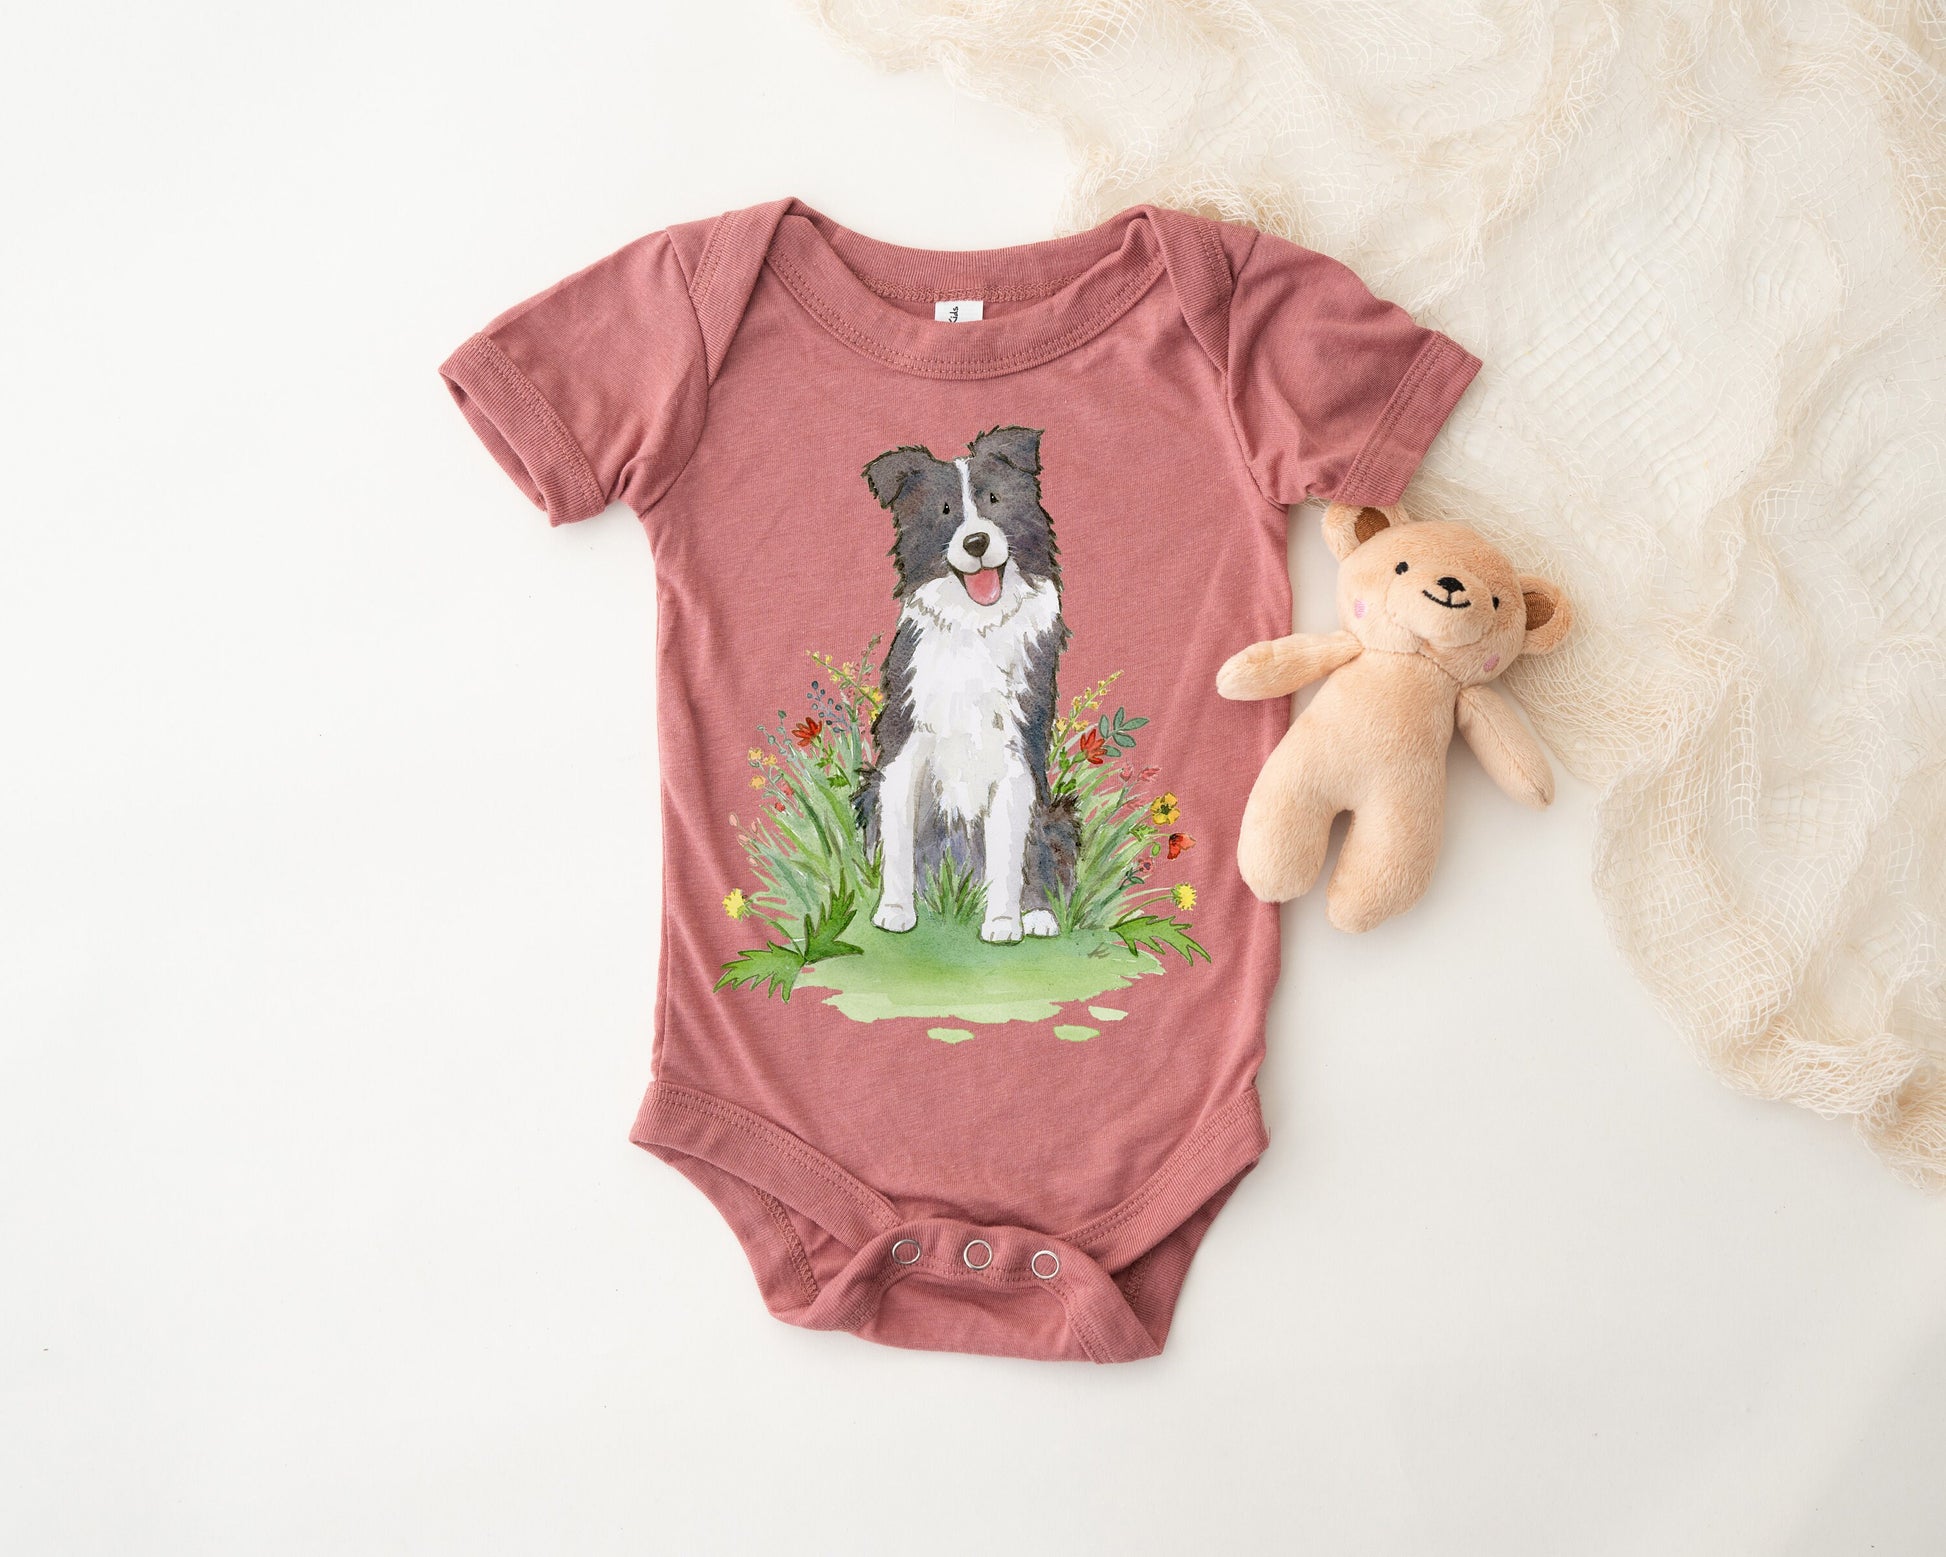 Baby bodysuit with a black and white border collie picture printed on it.